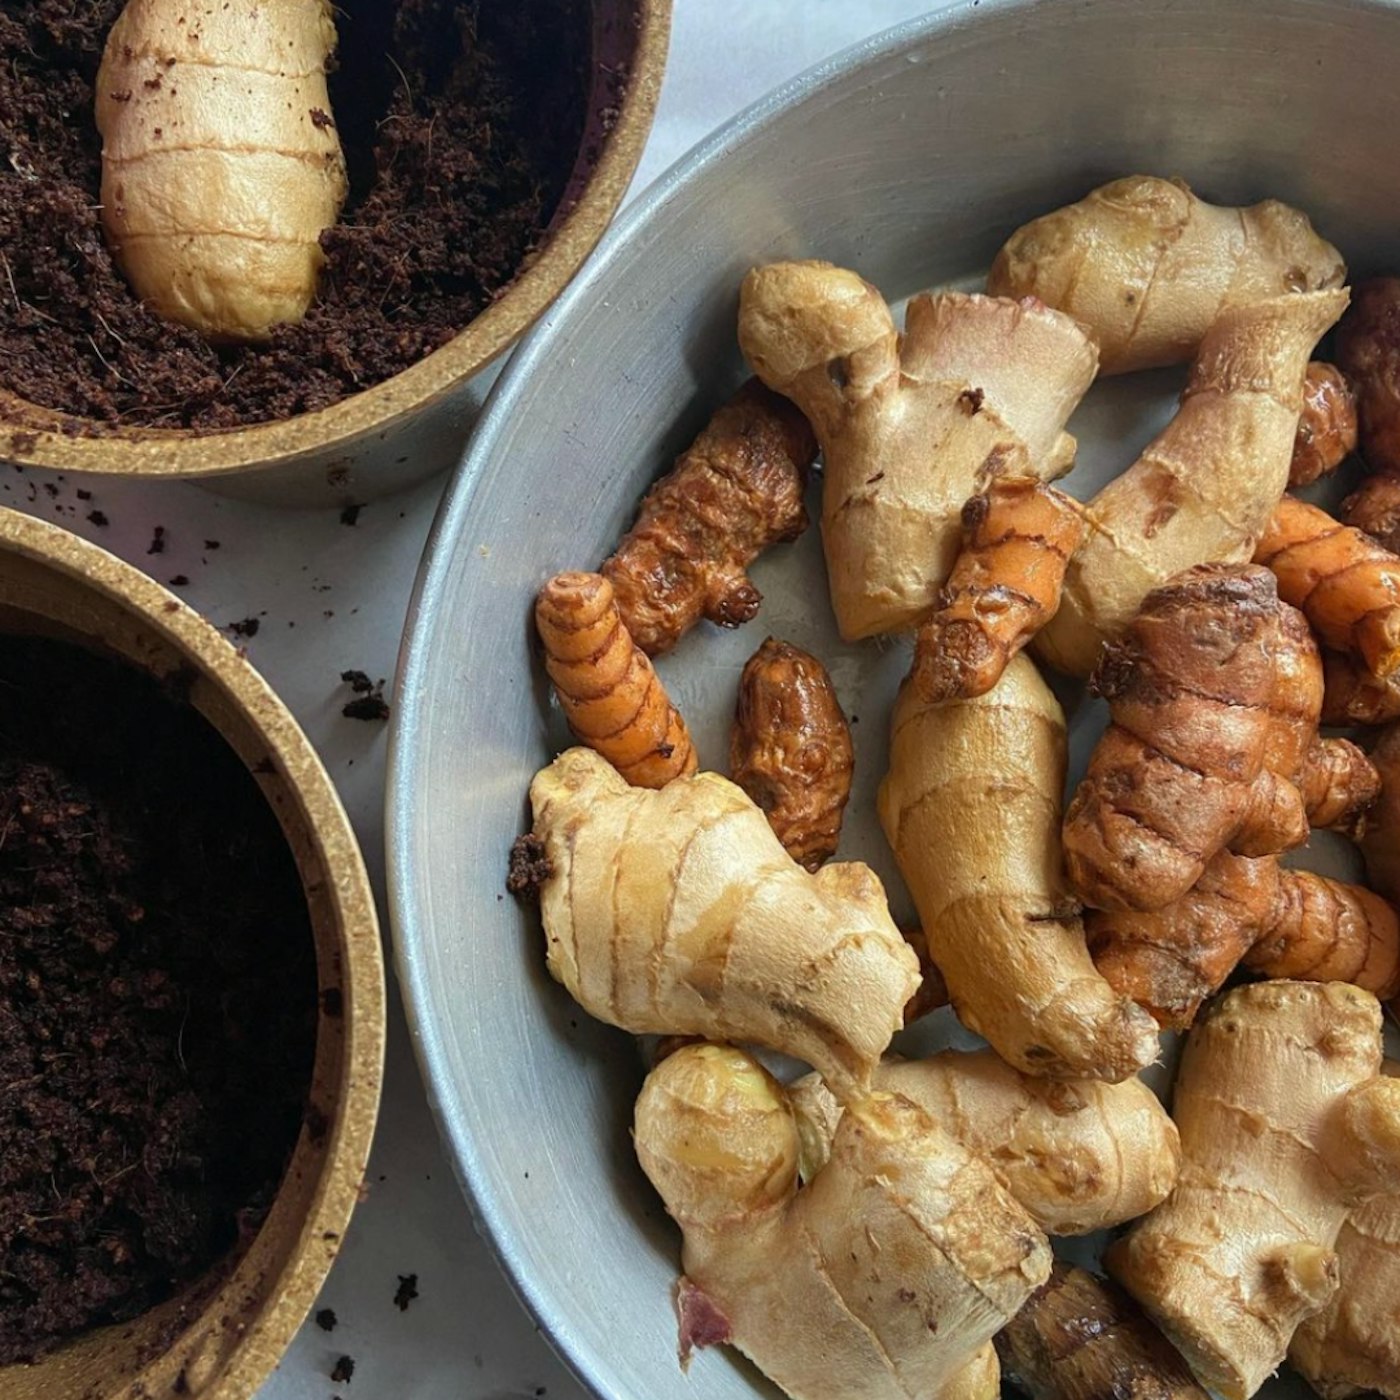 ginger and turmeric in a bowl